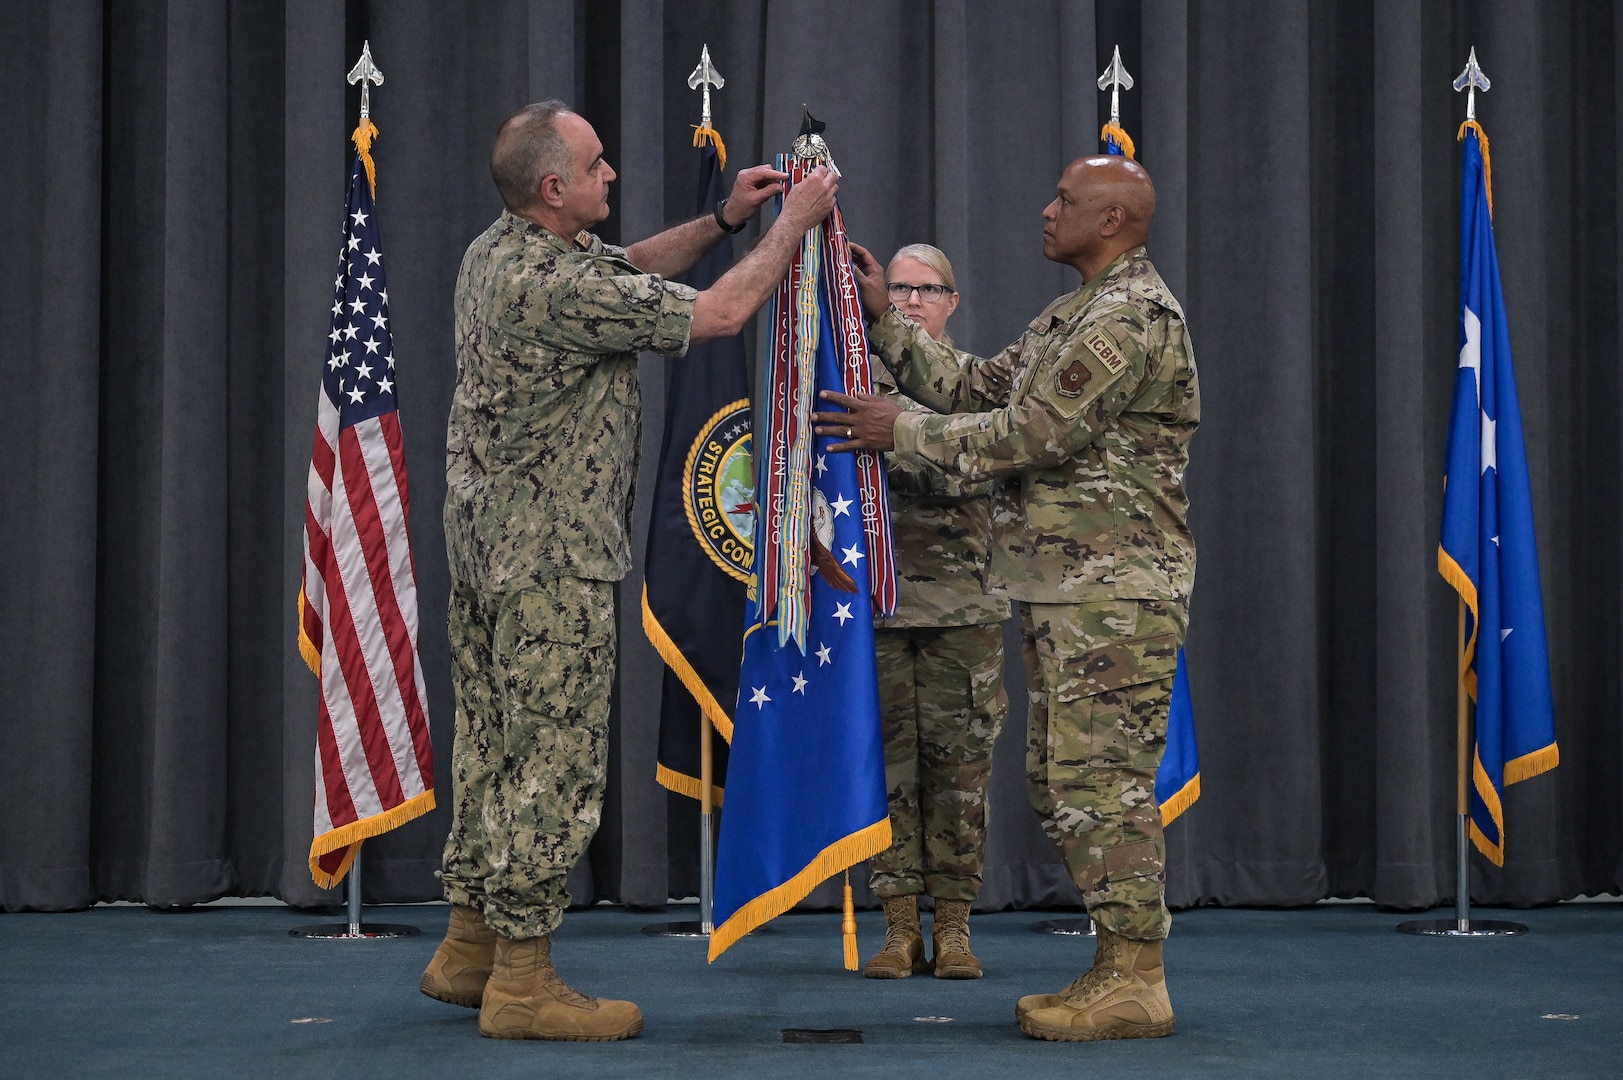 Adm. Charles Richard, left, U.S. Strategic Command commander, and Gen. Anthony Cotton, right, Air Force Global Strike Command commander, pin the Joint Meritorious Unit Award ribbon on the Air Force flag at Barksdale Air Force Base, Louisiana on May, 18, 2022. The JMUA was given to AFGSC in recognition of the command’s efforts and achievements during the height of the COVID-19 pandemic. AFGSC ensured mission success across three intercontinental ballistic missile wings and 495 remote facilities across the nation’s northern-tier bases, enabling U.S. Strategic Command to meet mission readiness capabilities. (U.S. Air Force photo by Senior Airman Jonathan E. Ramos)